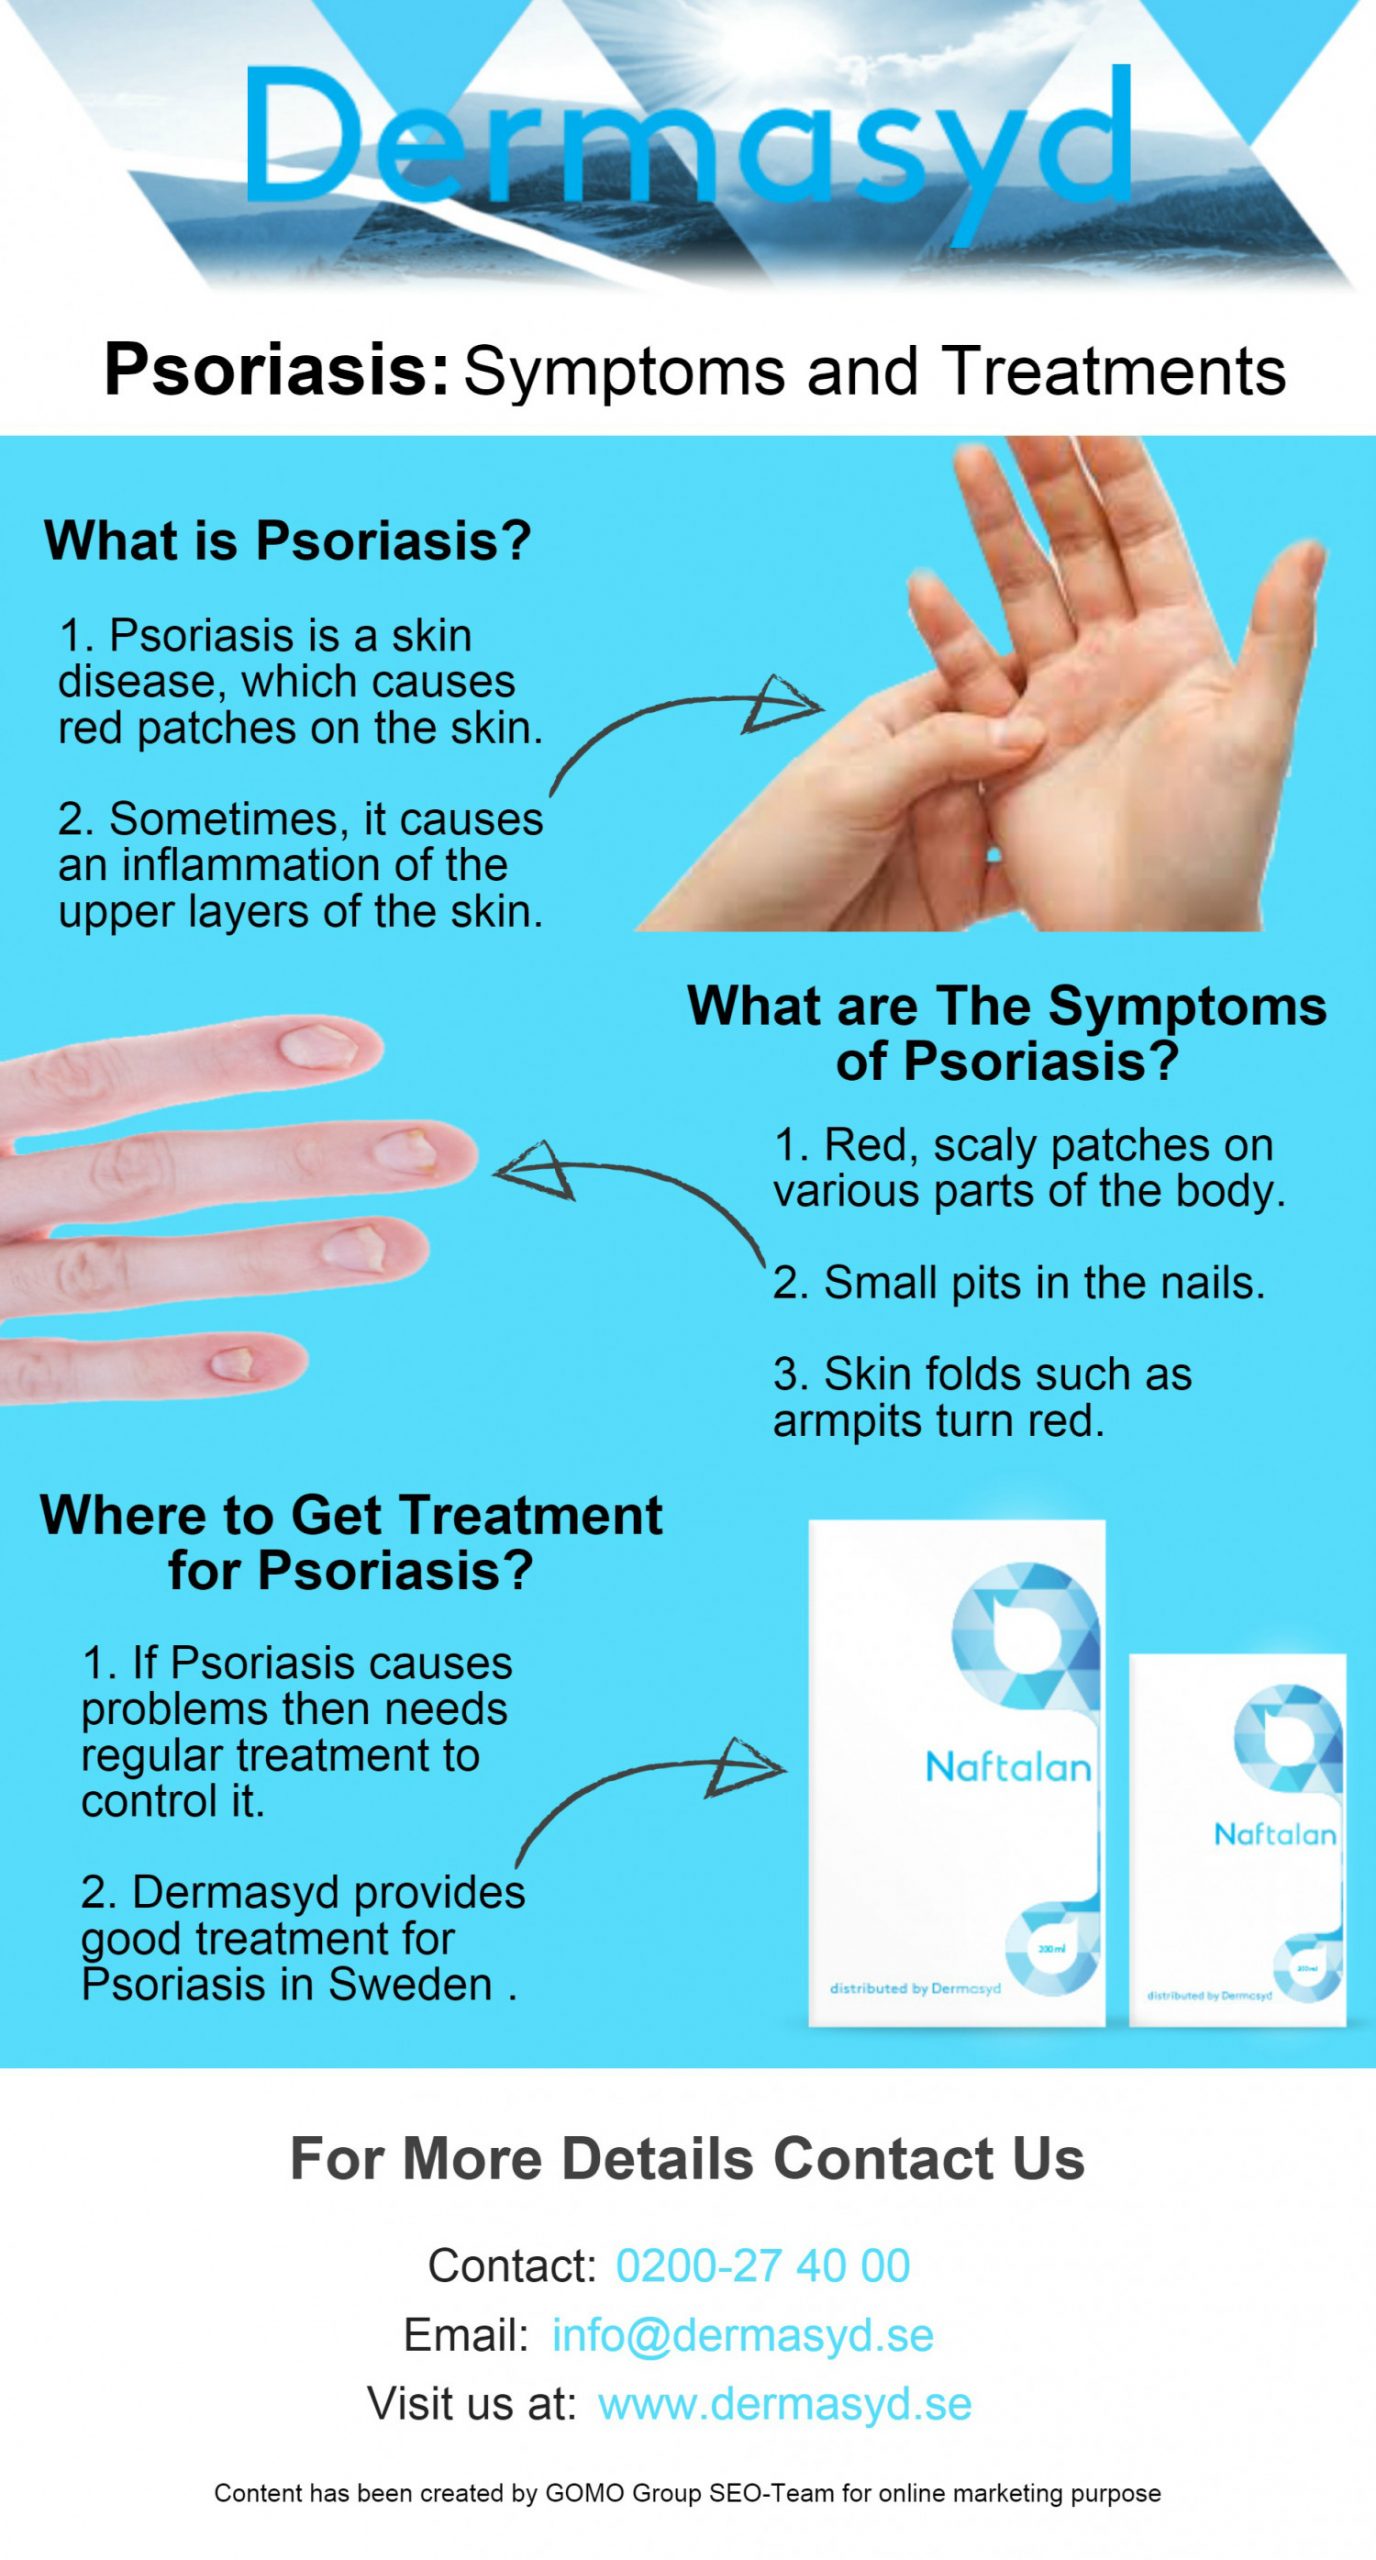 Psoriasis: Symptoms and Treatment